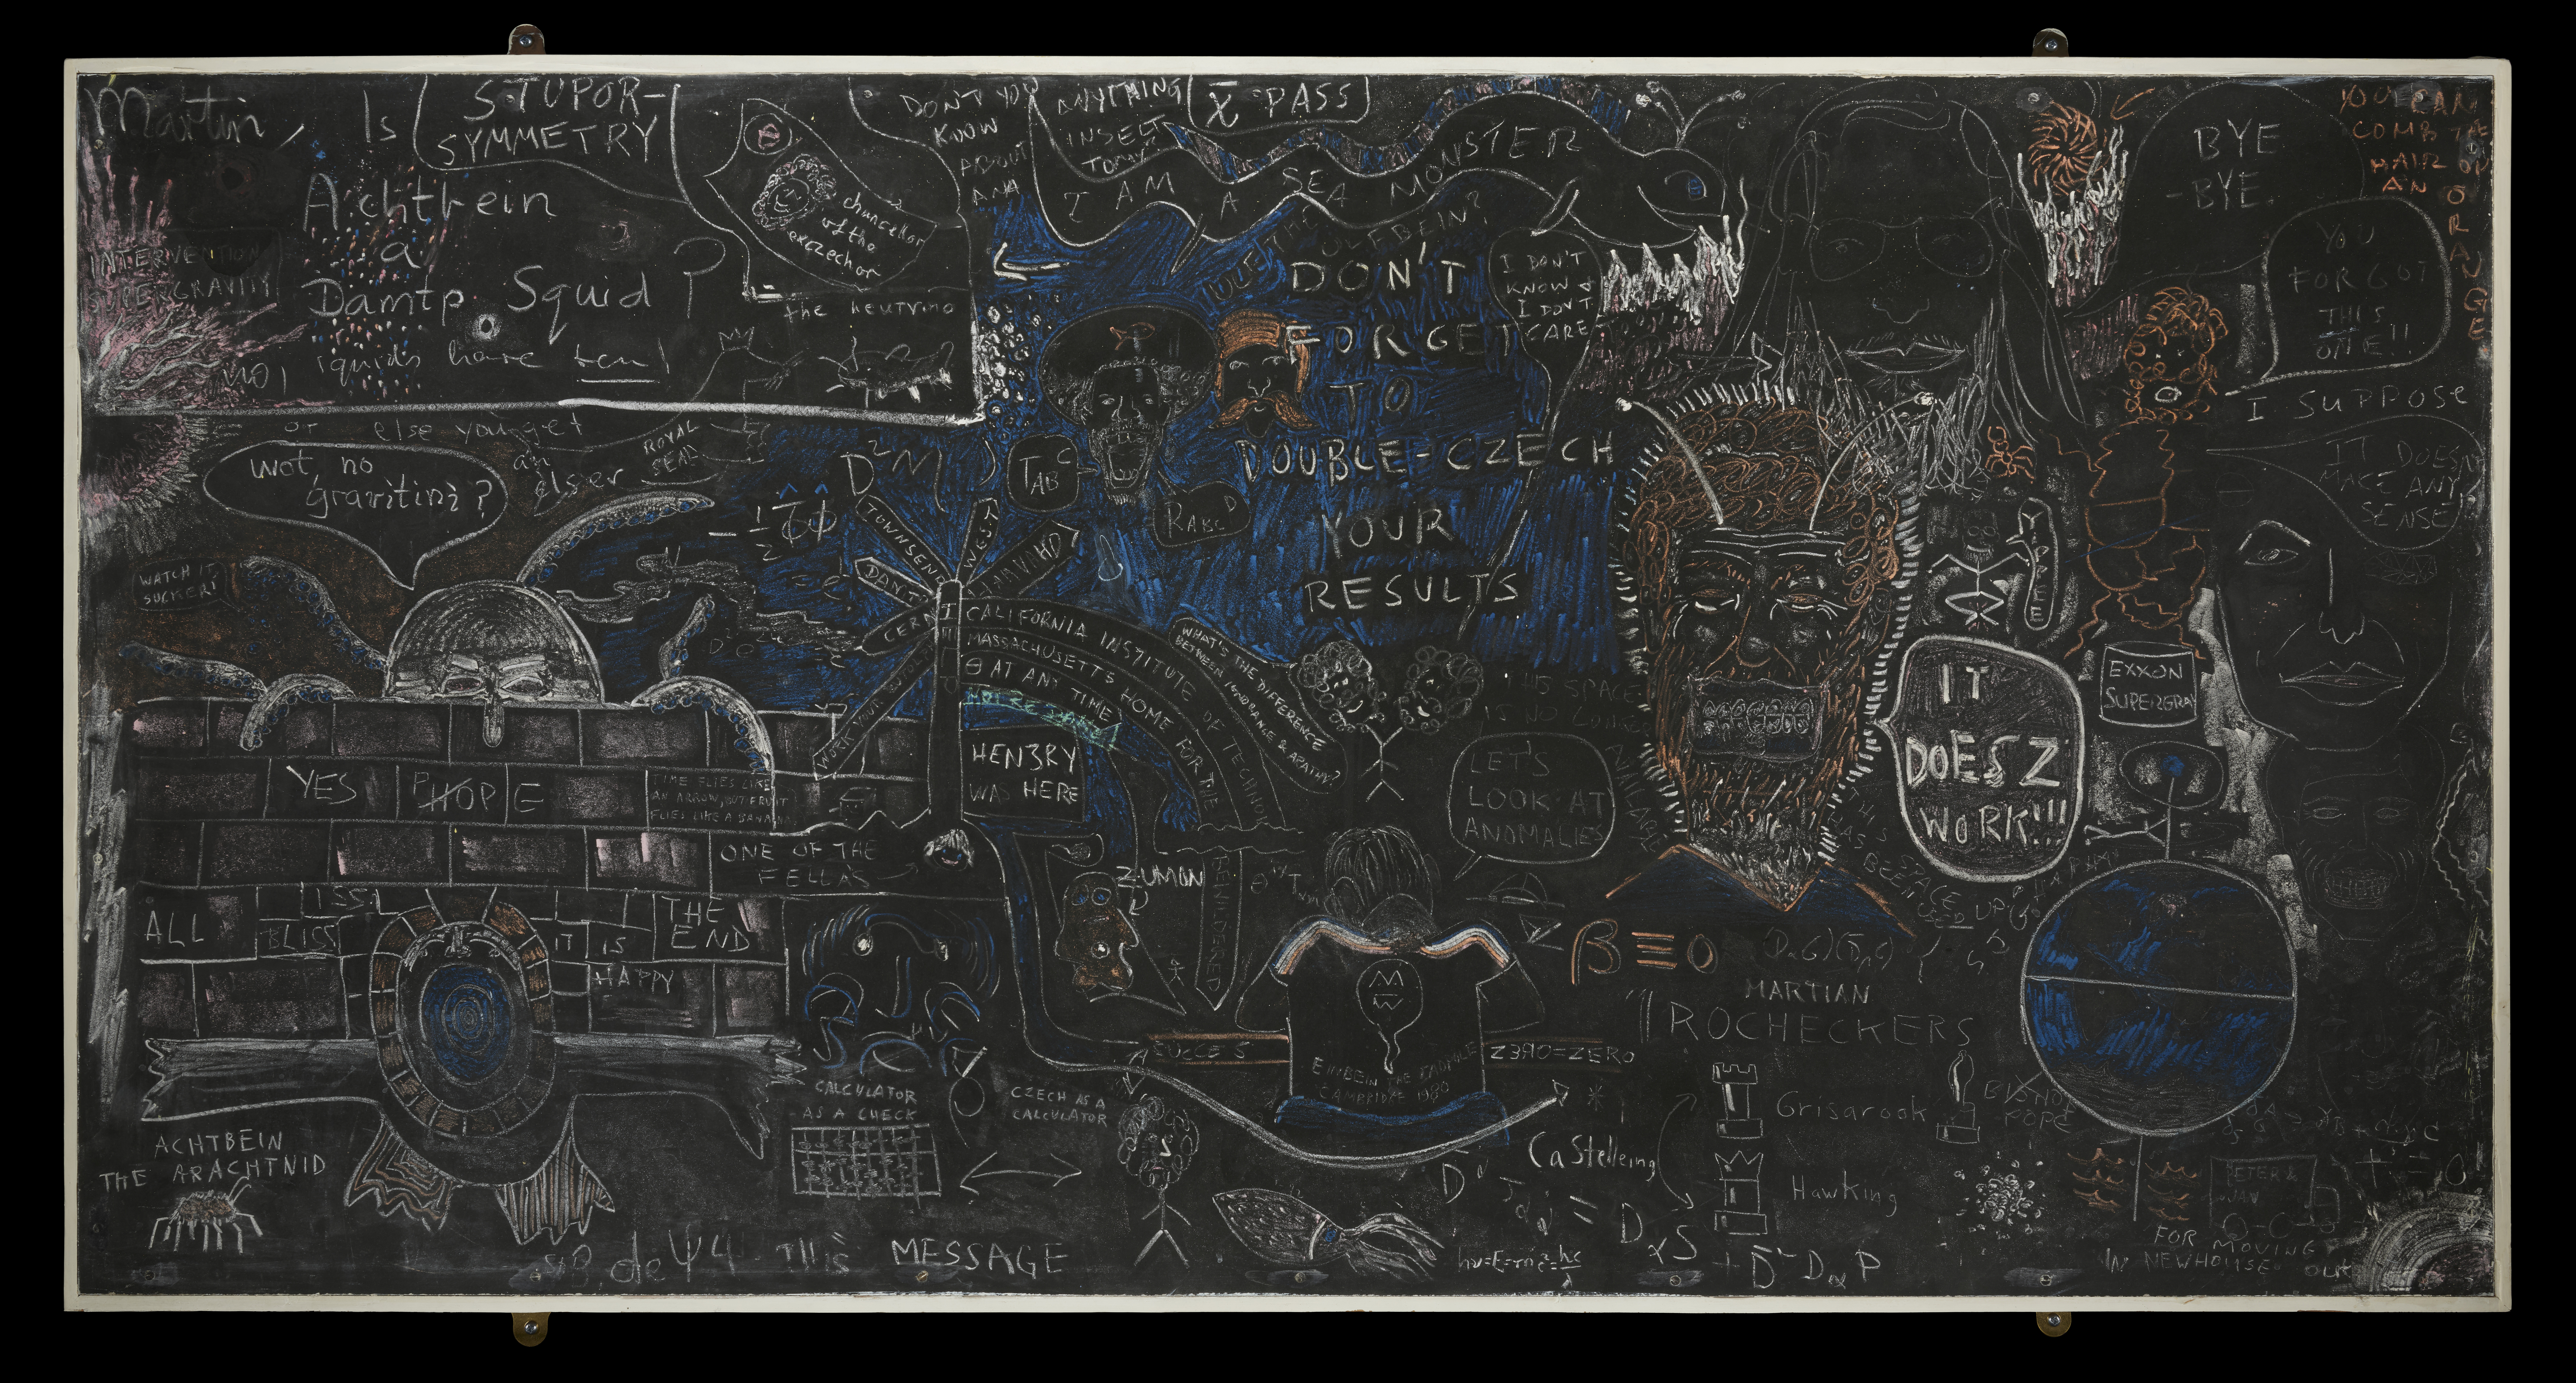 Colour photograph of Stephen Hawkings blackboard covered in doodles and grafitti